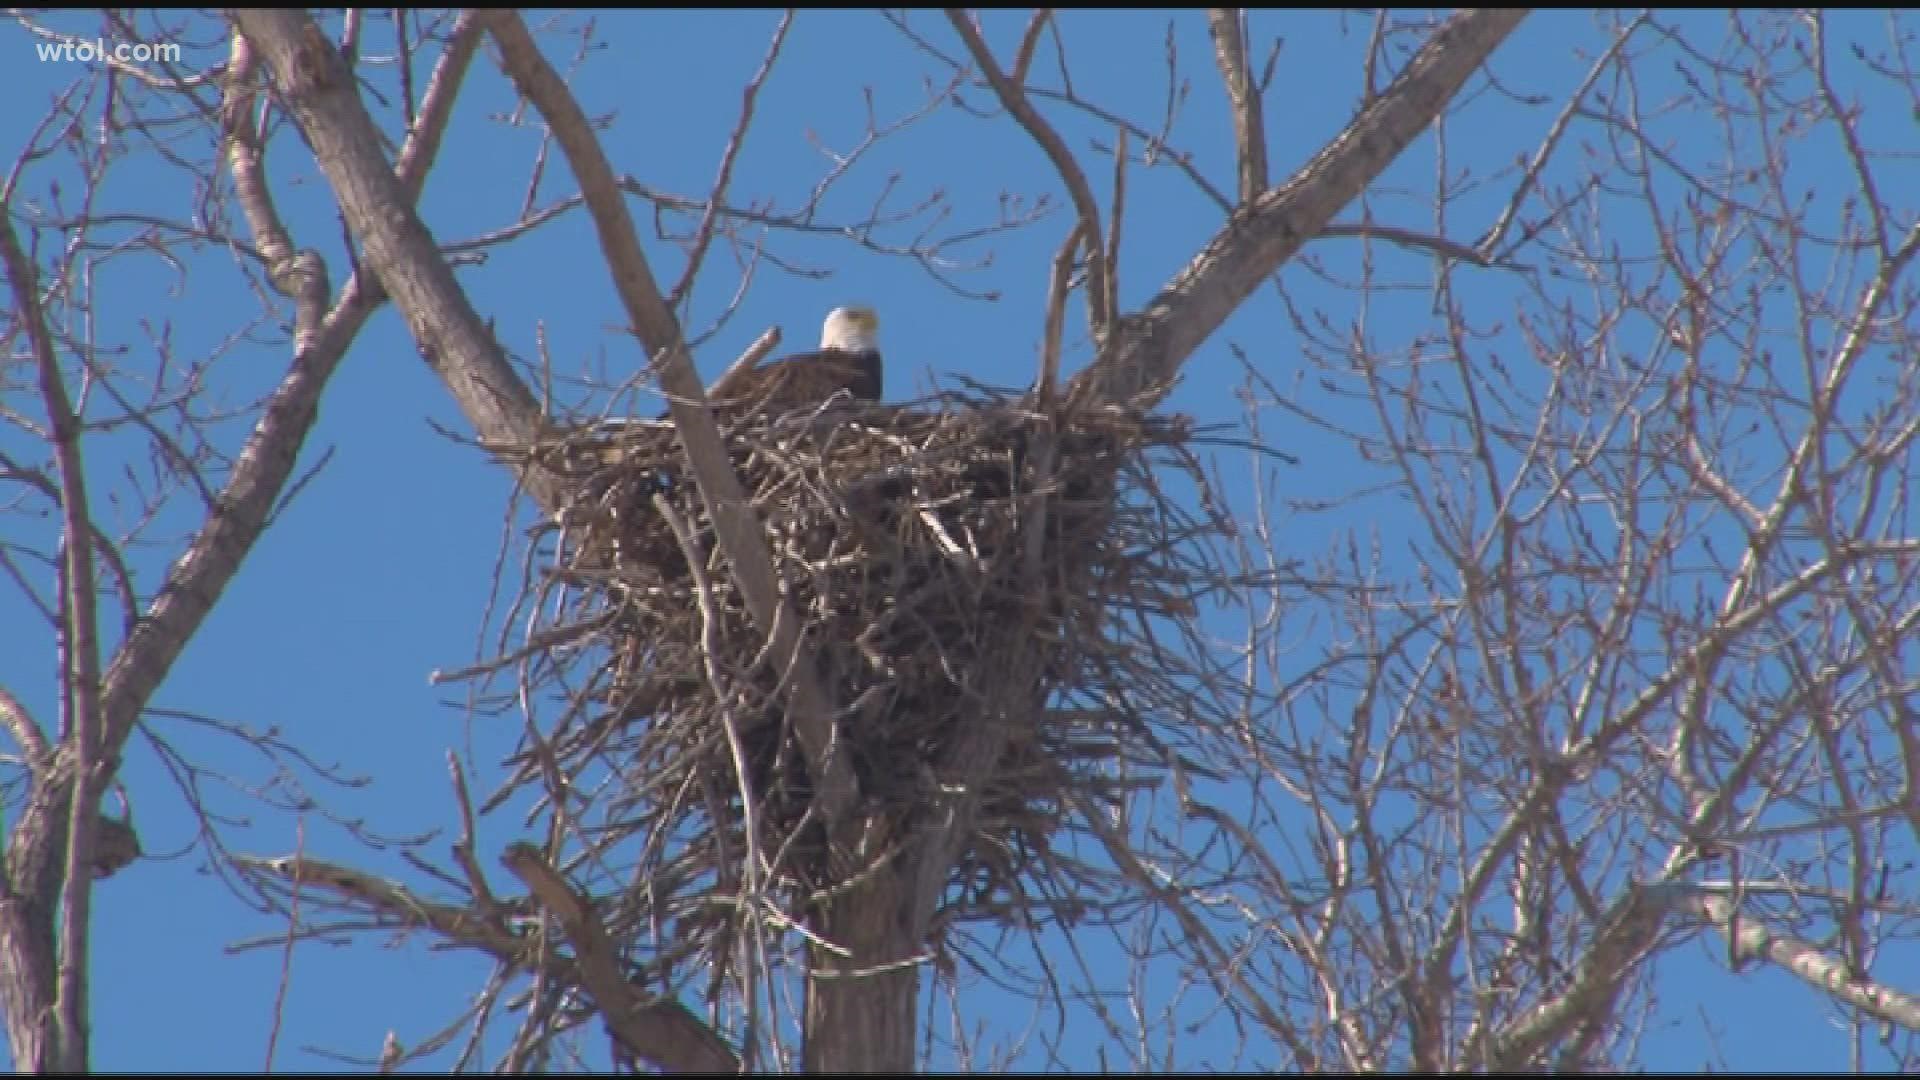 The Ohio Department of Wildlife estimates there are more than 800 nesting pairs of bald eagles in the state, up from just four in the late 1970s.